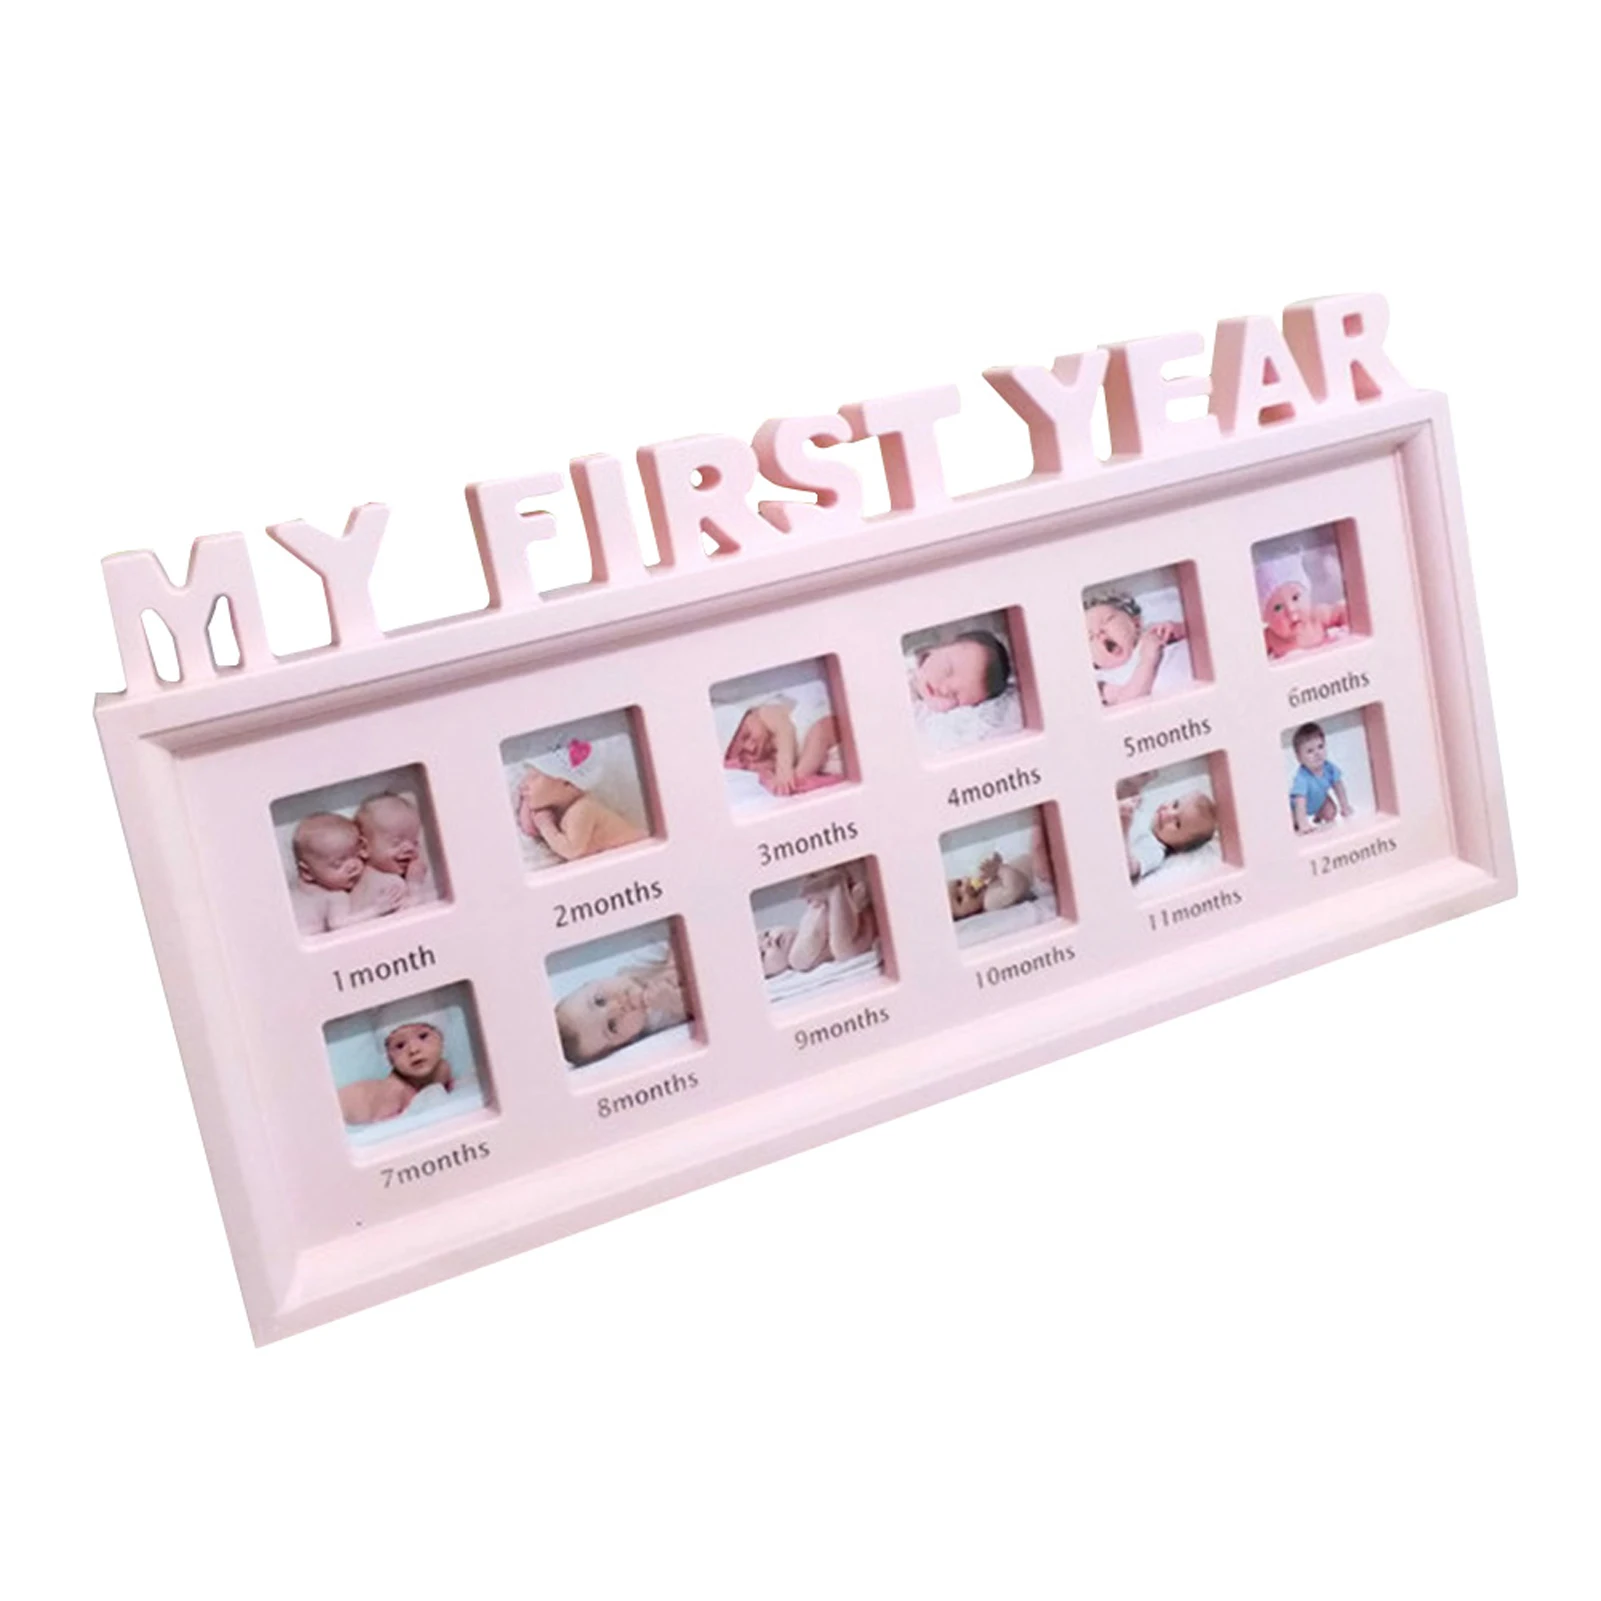 

12 Months My First Year Display Moments Show Newborn Baby Souvenirs Home Decor Photo Frame PVC Ornaments Desktop Girls Boys